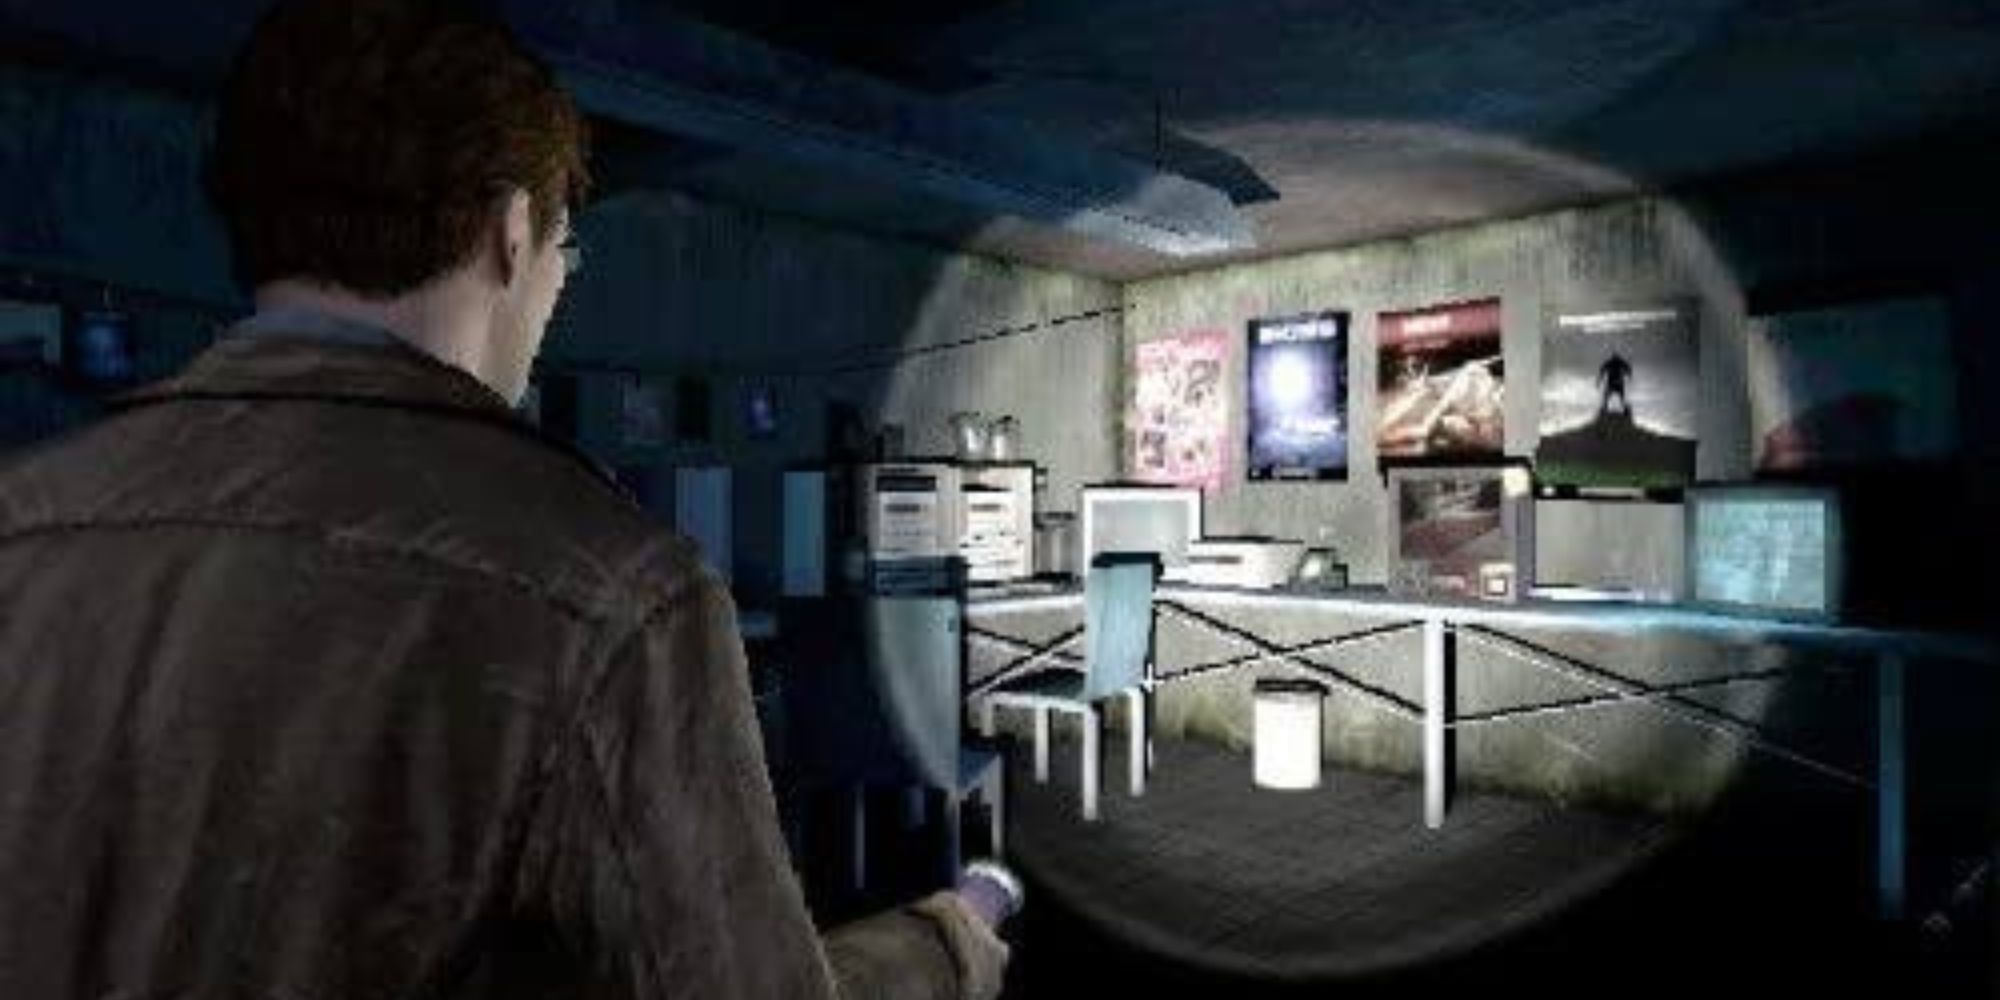 Harry Mason investigates a dark room covered in posters in Silent Hill Shattered memories